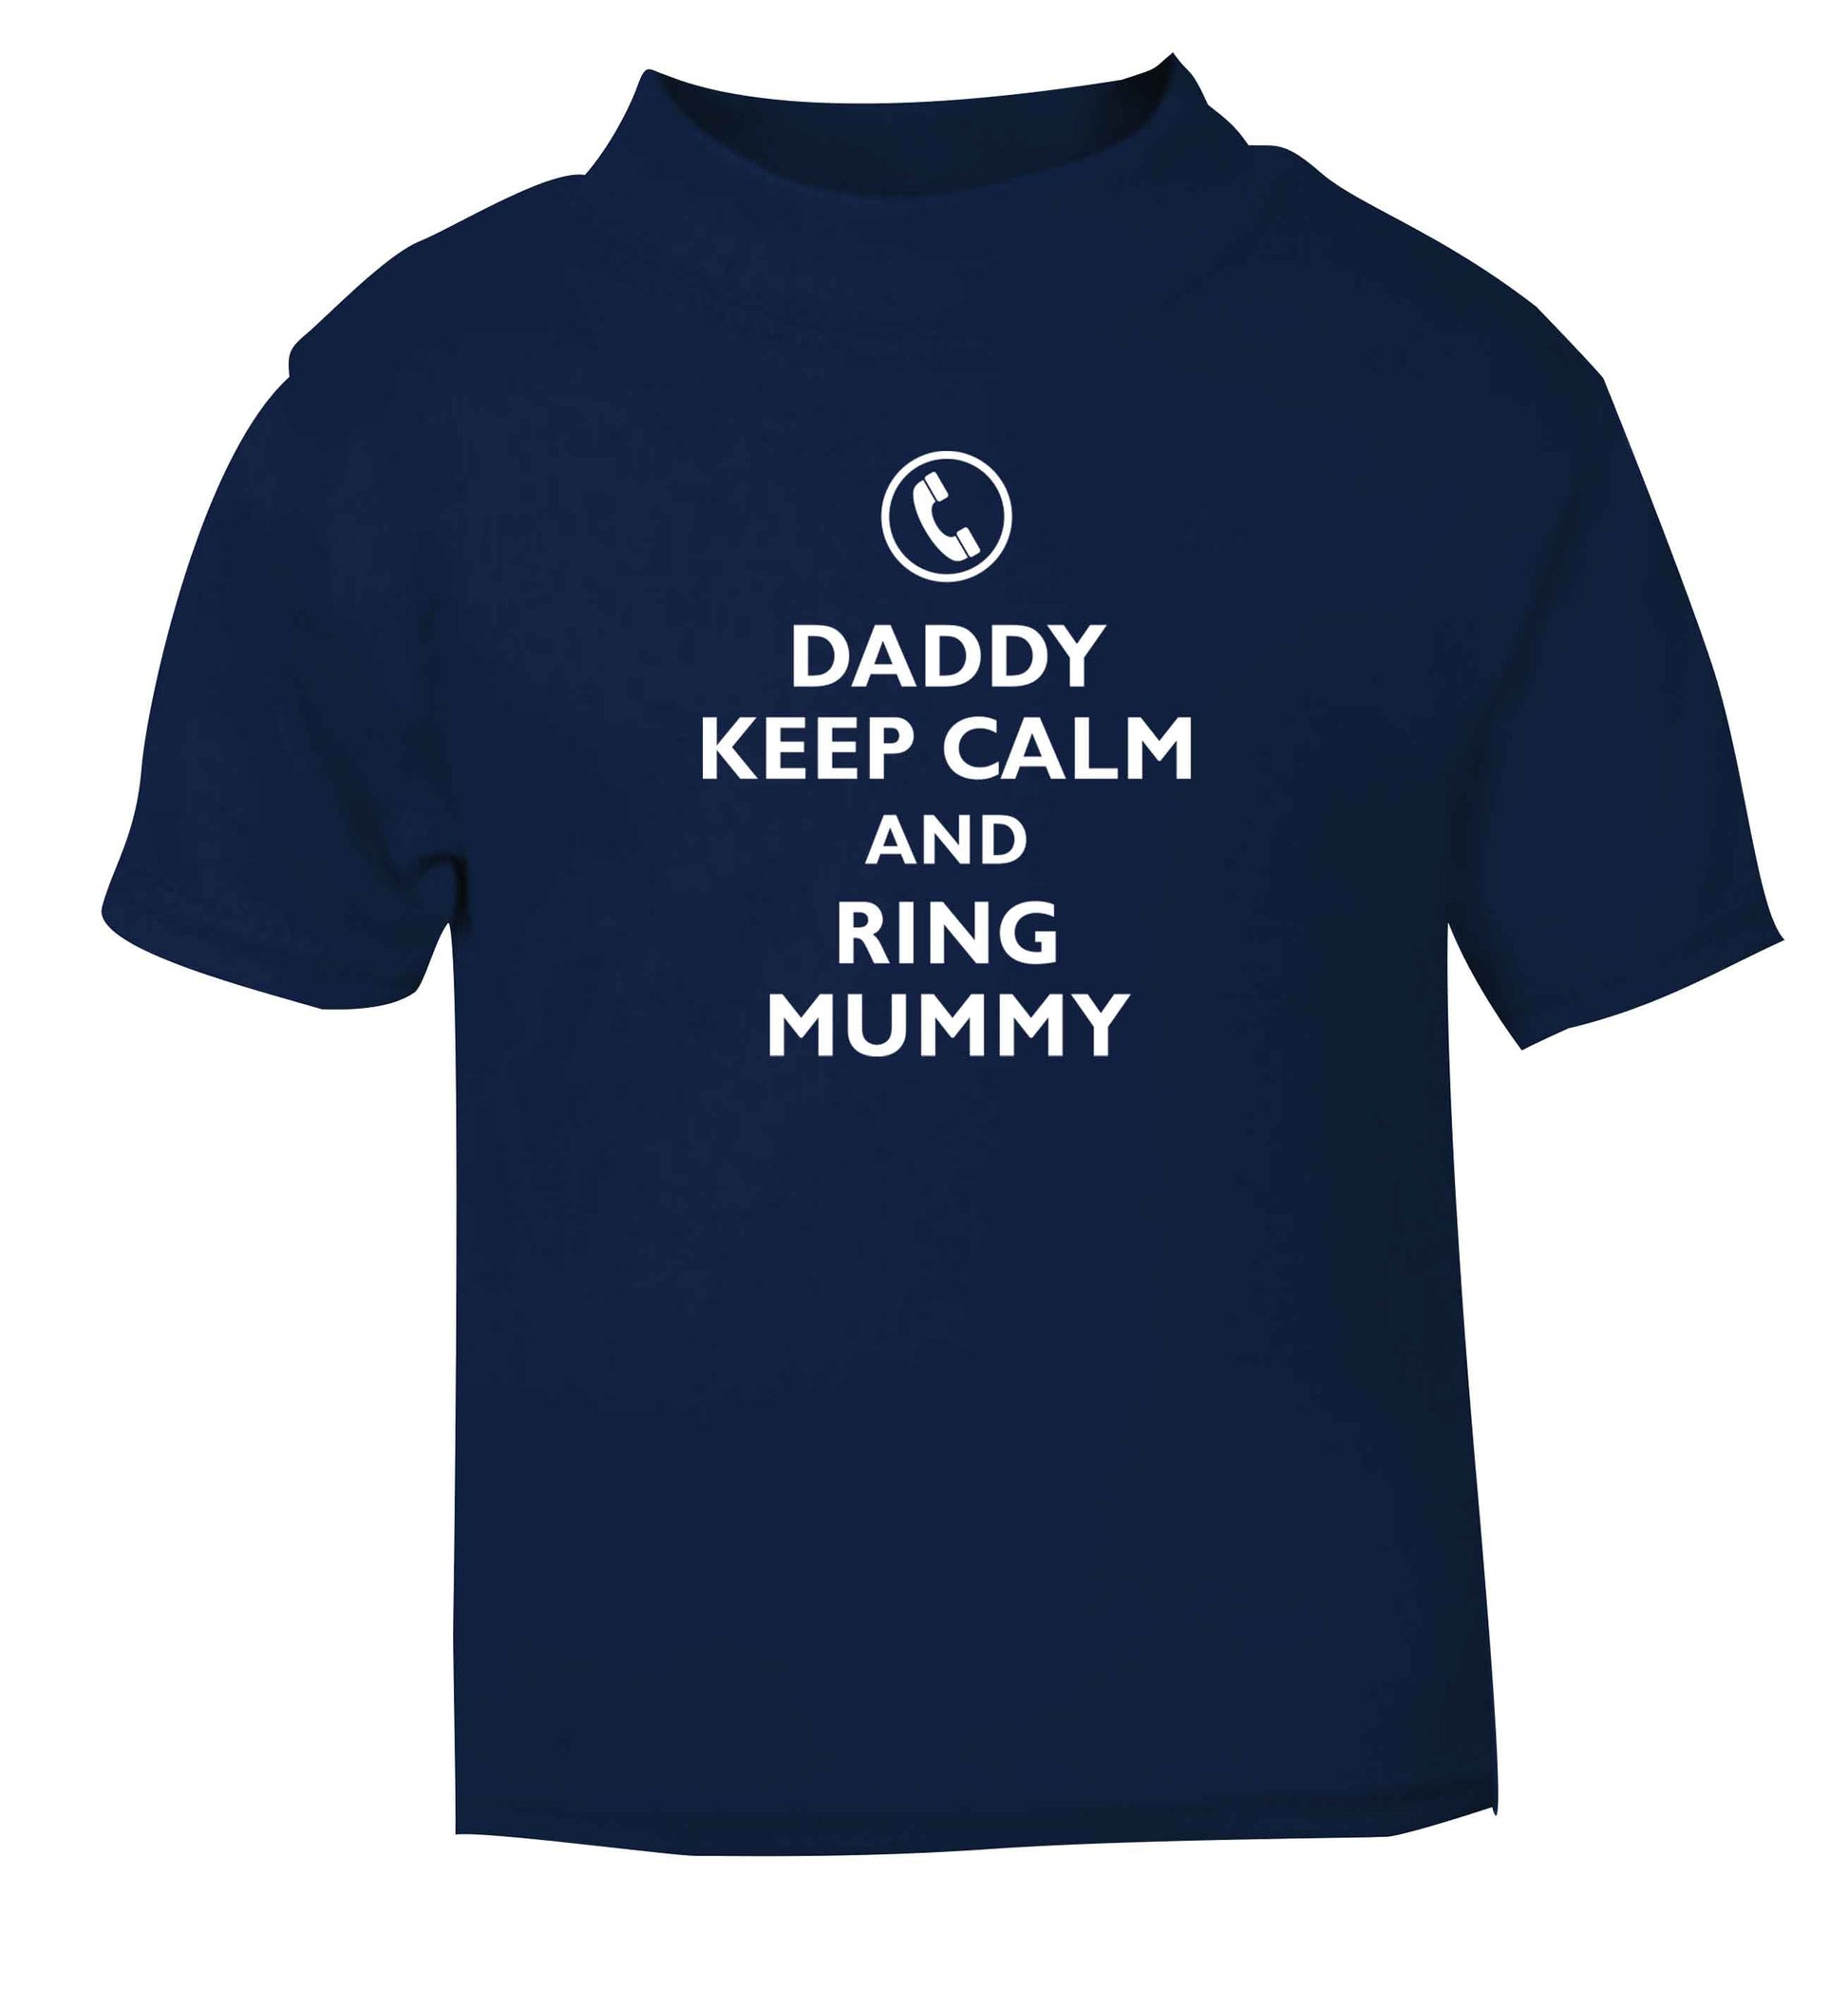 Daddy keep calm and ring mummy navy baby toddler Tshirt 2 Years